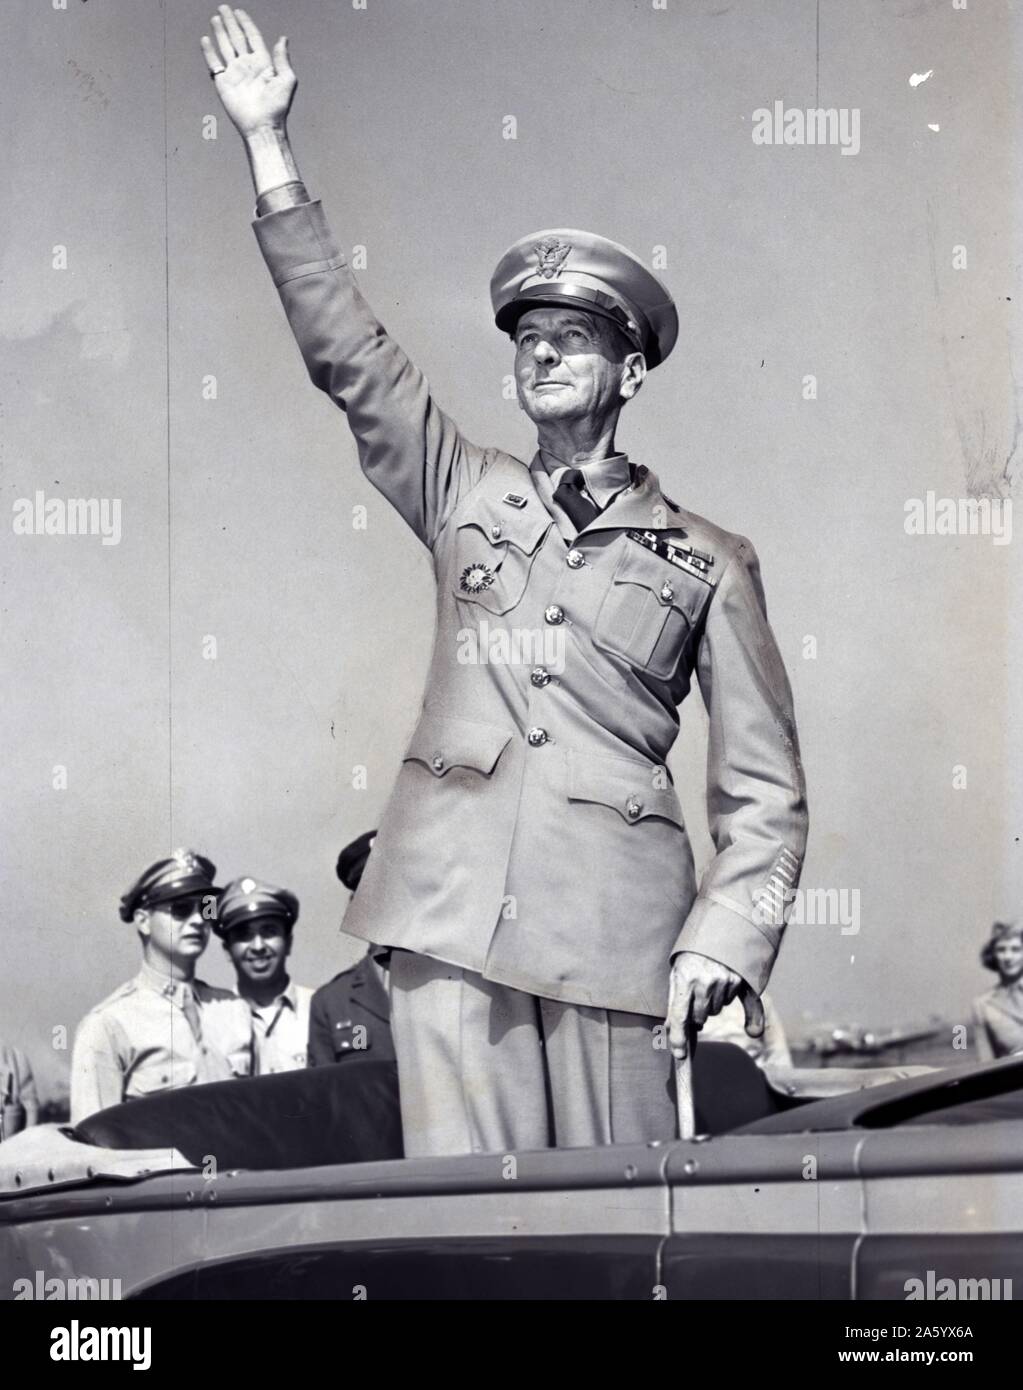 General Wainwright, standing in car, waving to crowd gathered at La Guardia field 1945. Jonathan Mayhew 'Skinny' Wainwright IV (August 23, 1883 – September 2, 1953) was a career American army officer and the commander of Allied forces in the Philippines at the time of their surrender to the Empire of Japan during World War II Stock Photo